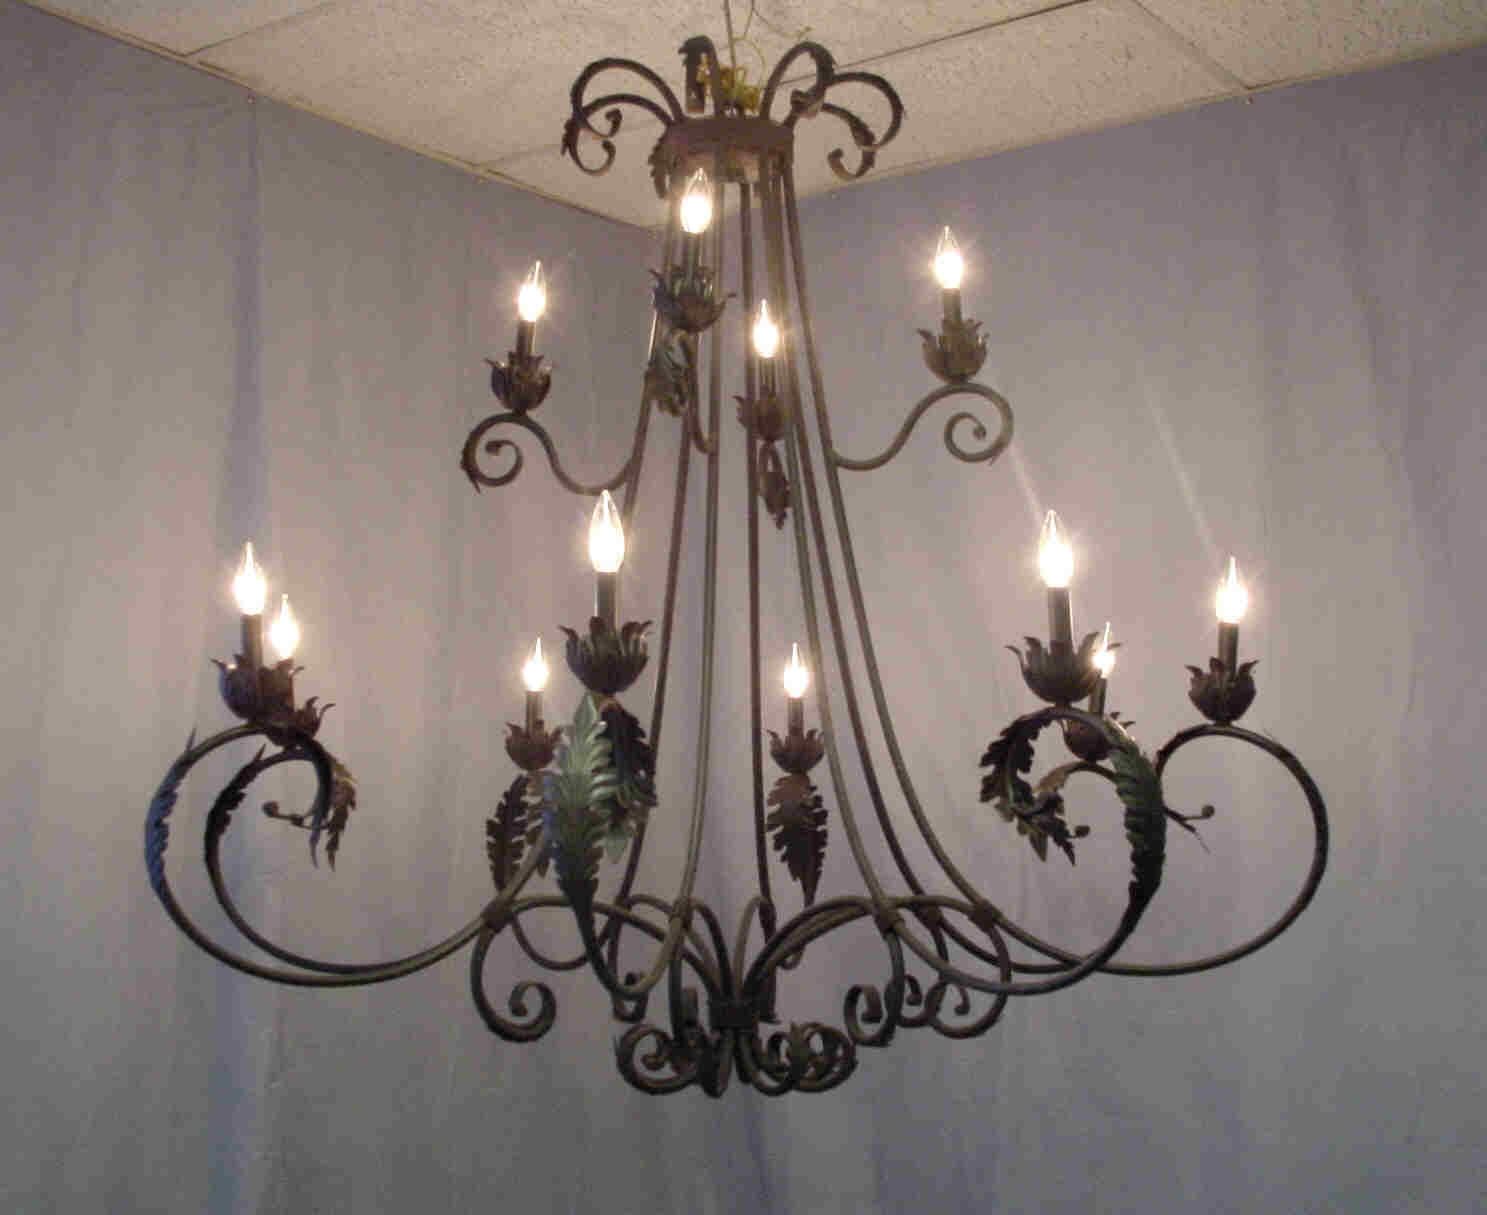 Rustic Chandeliers Wrought Iron Pertaining To Wrought Iron Chandeliers (View 4 of 12)